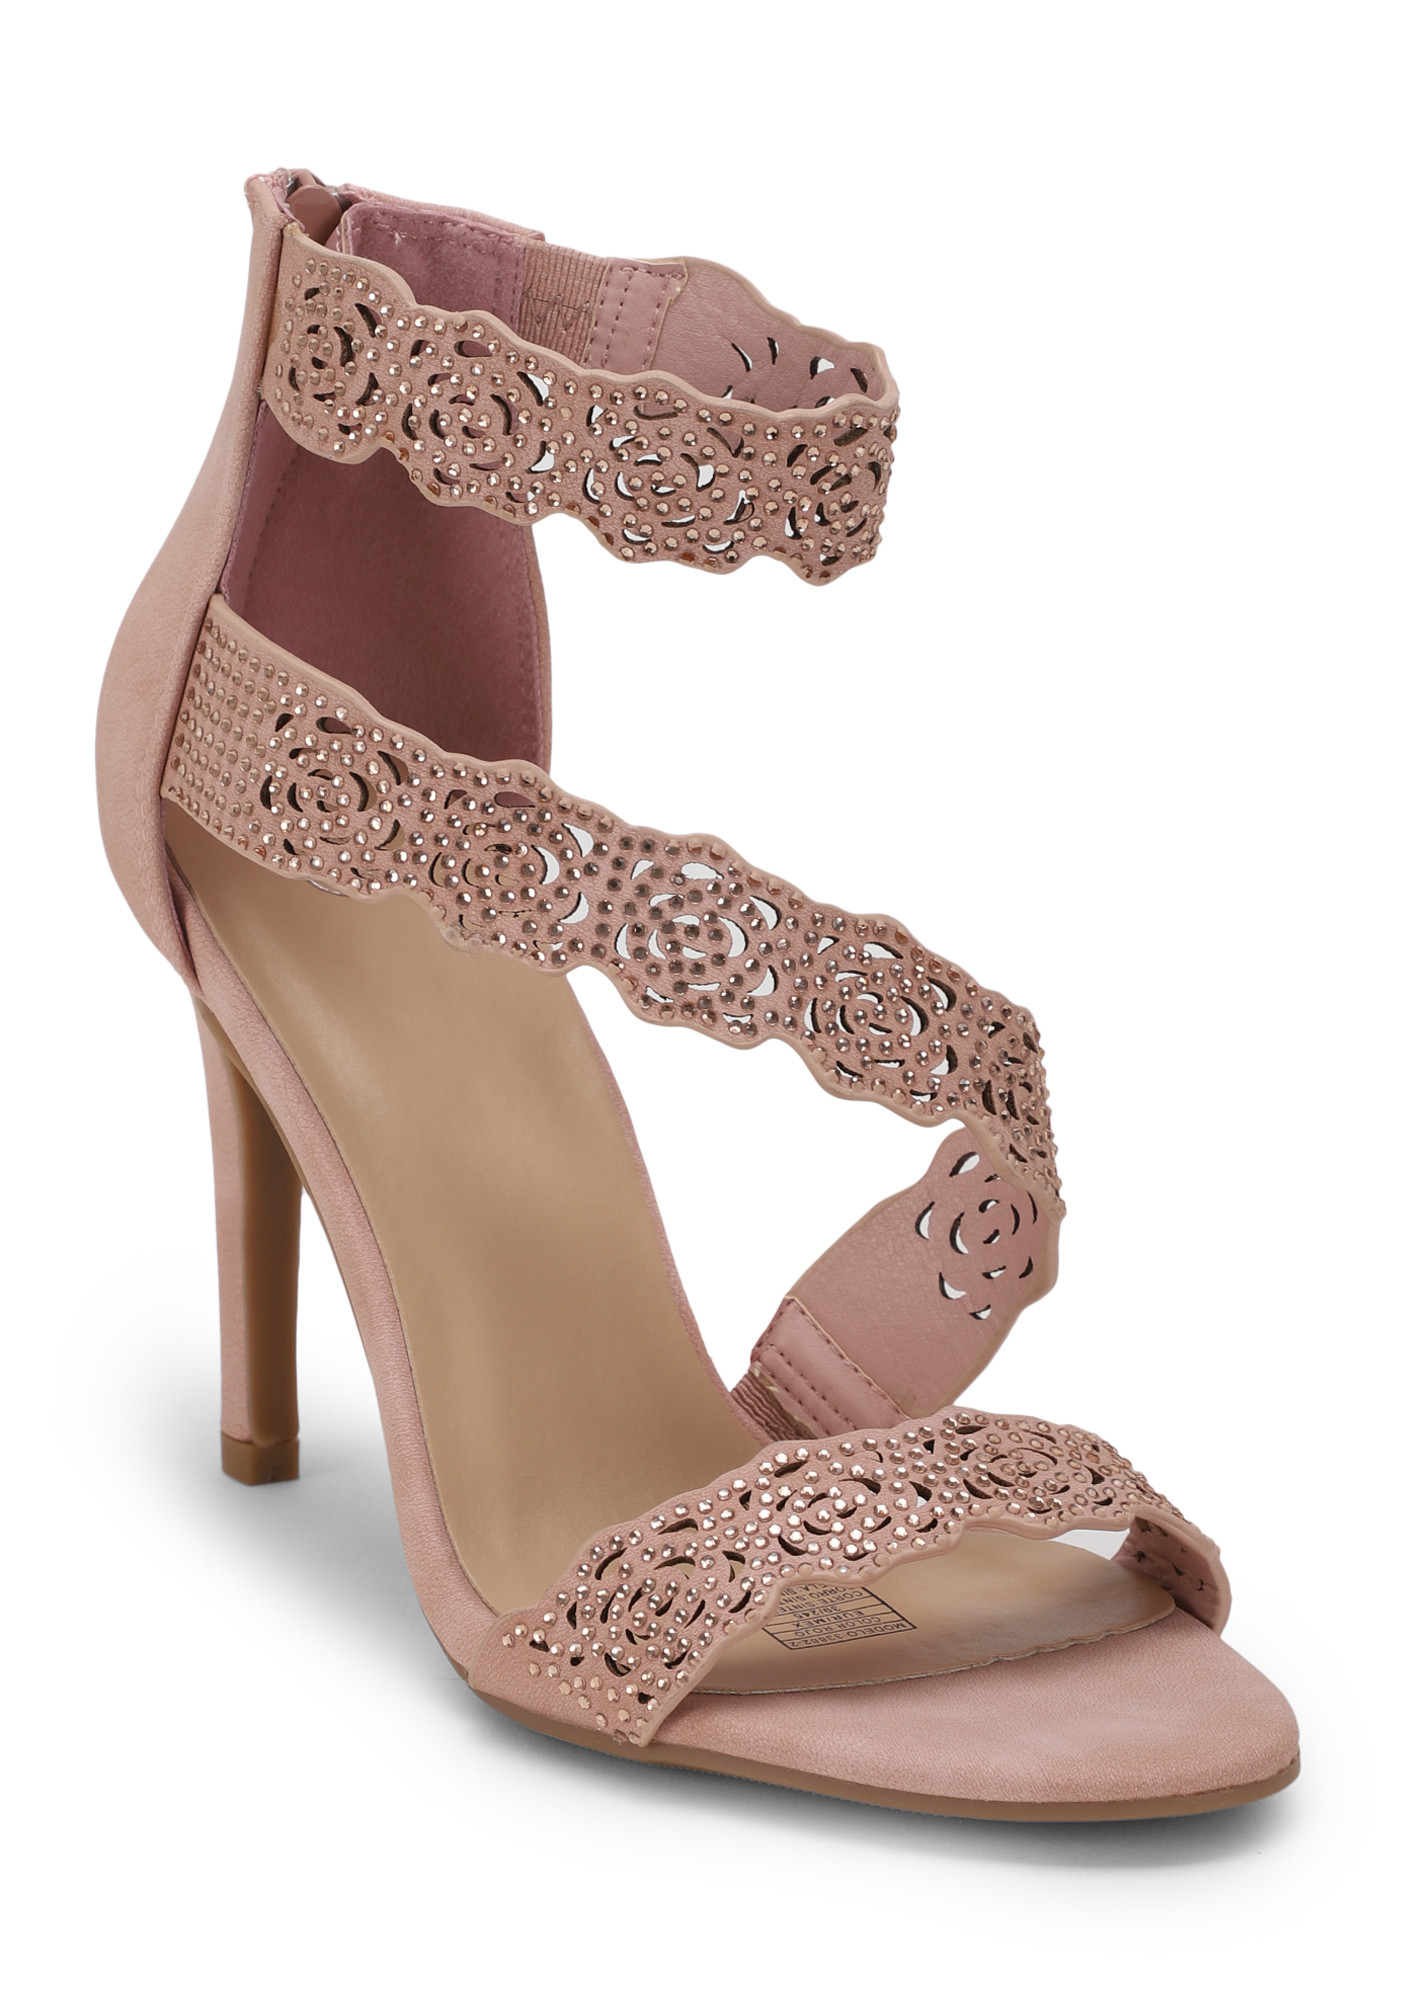 MEET ME AT HAPPY HOURS NUDE PINK HEELED SANDALS